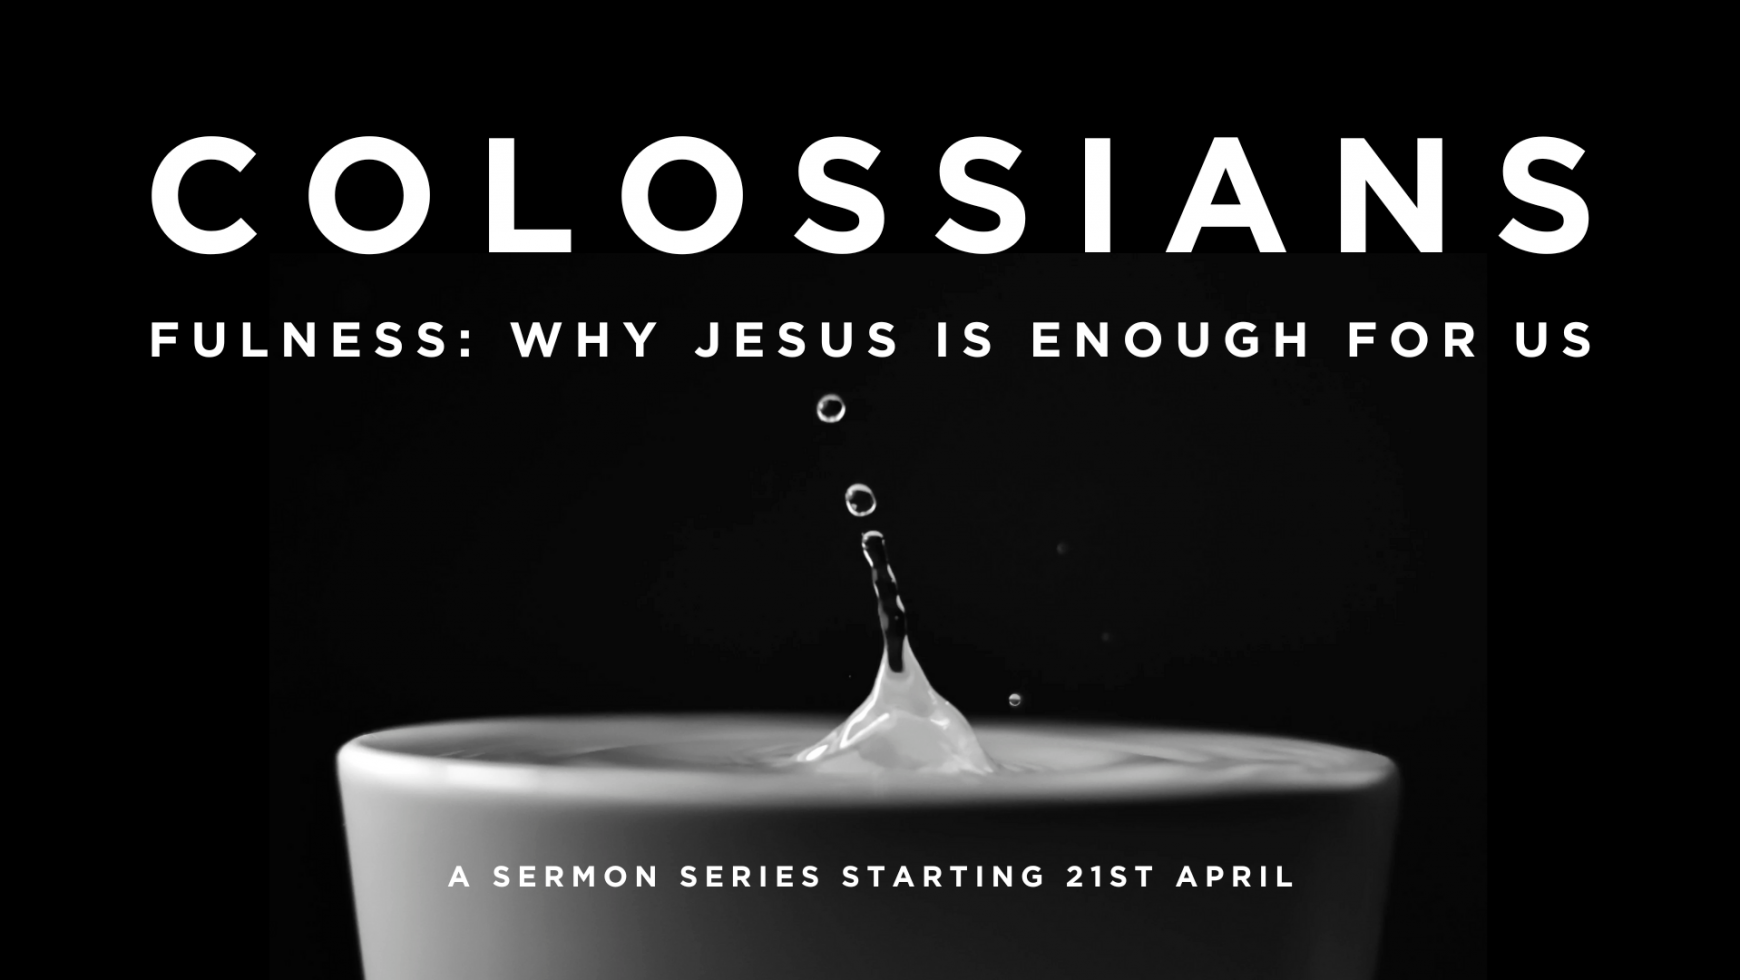 Colossians: Why Jesus is enough for us!